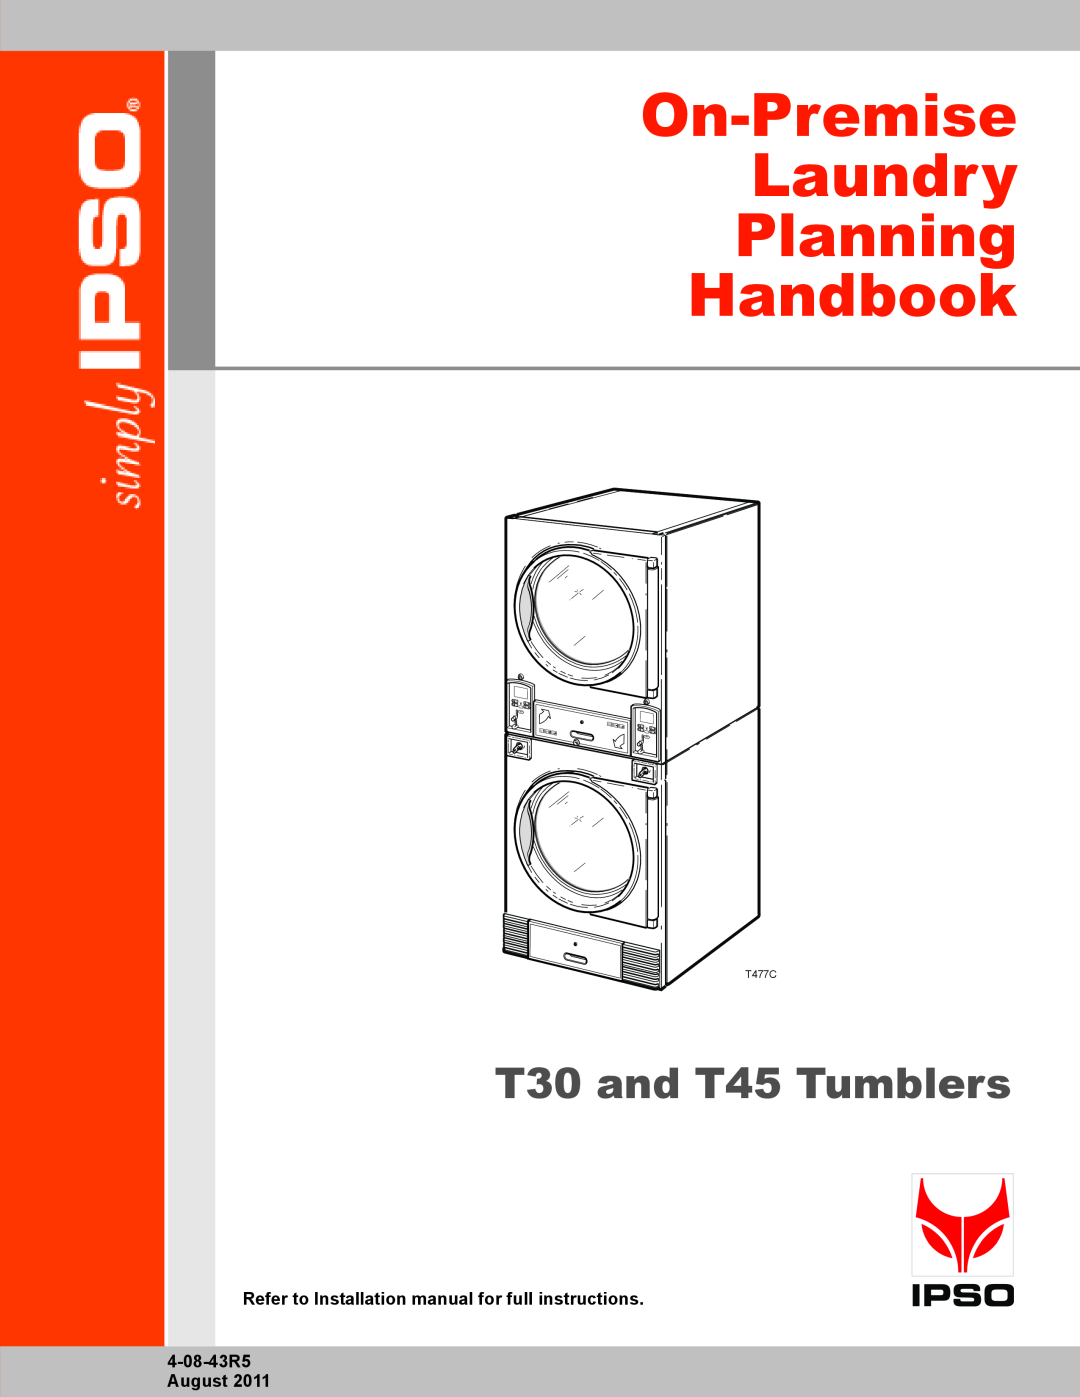 IPSO installation manual On-Premise Laundry Planning Handbook, T30 and T45 Tumblers, T477C 